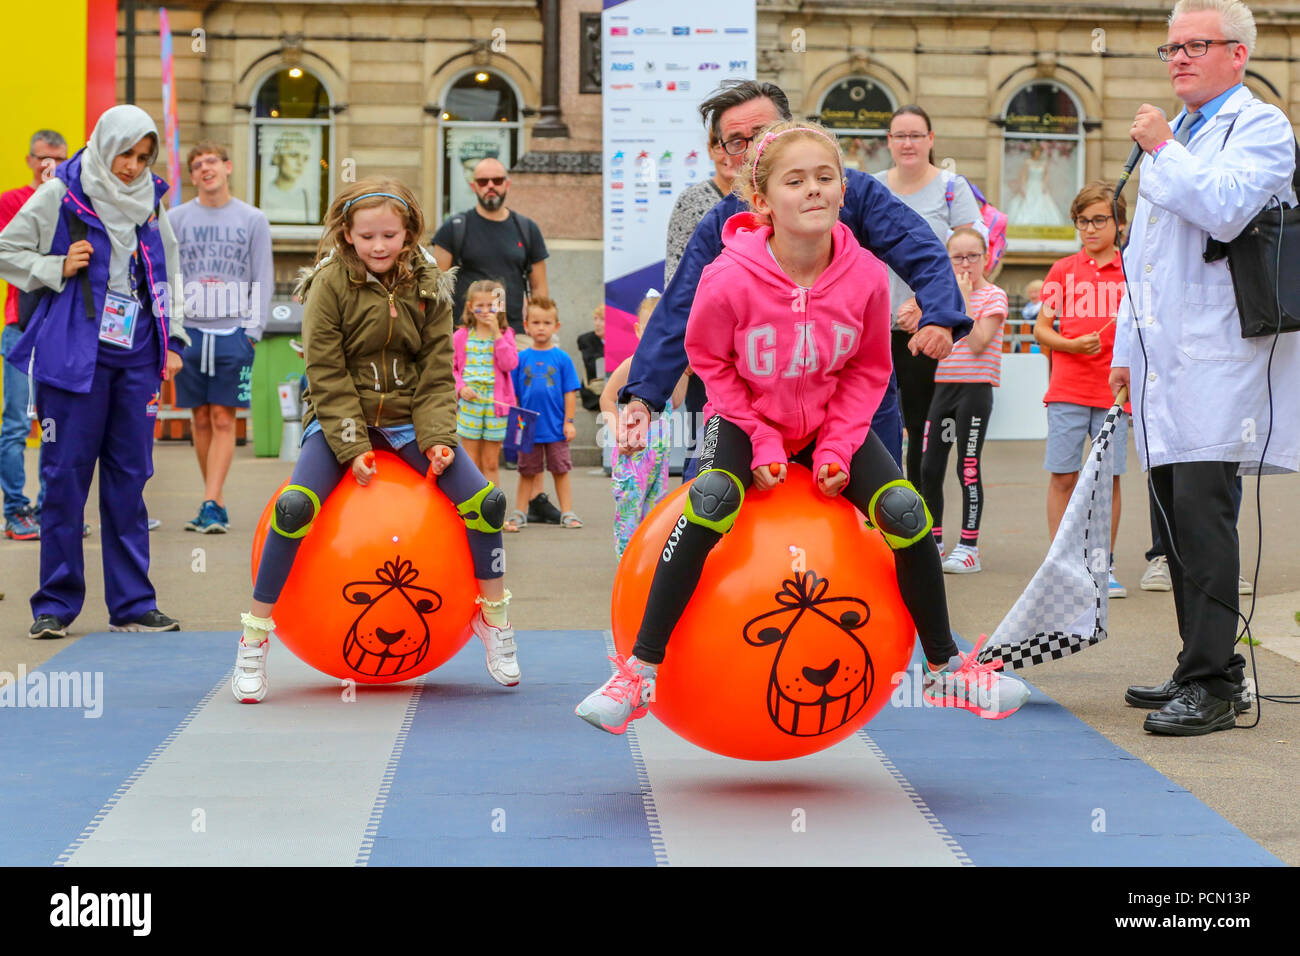 Glasgow, UK. 3rd July 2018, The Great Spacehopper Challenge took place in George Square, Glasgow as part of the Festival 2018 and European Games entertainments with children showing off their skills of balance, racing and really having fun. Here the race is between (L-R) Lexie Pickles, age 9 from Halifax, England  and Sophie McKenzie, age 6 from Paisley Credit: Findlay/Alamy Live News Stock Photo